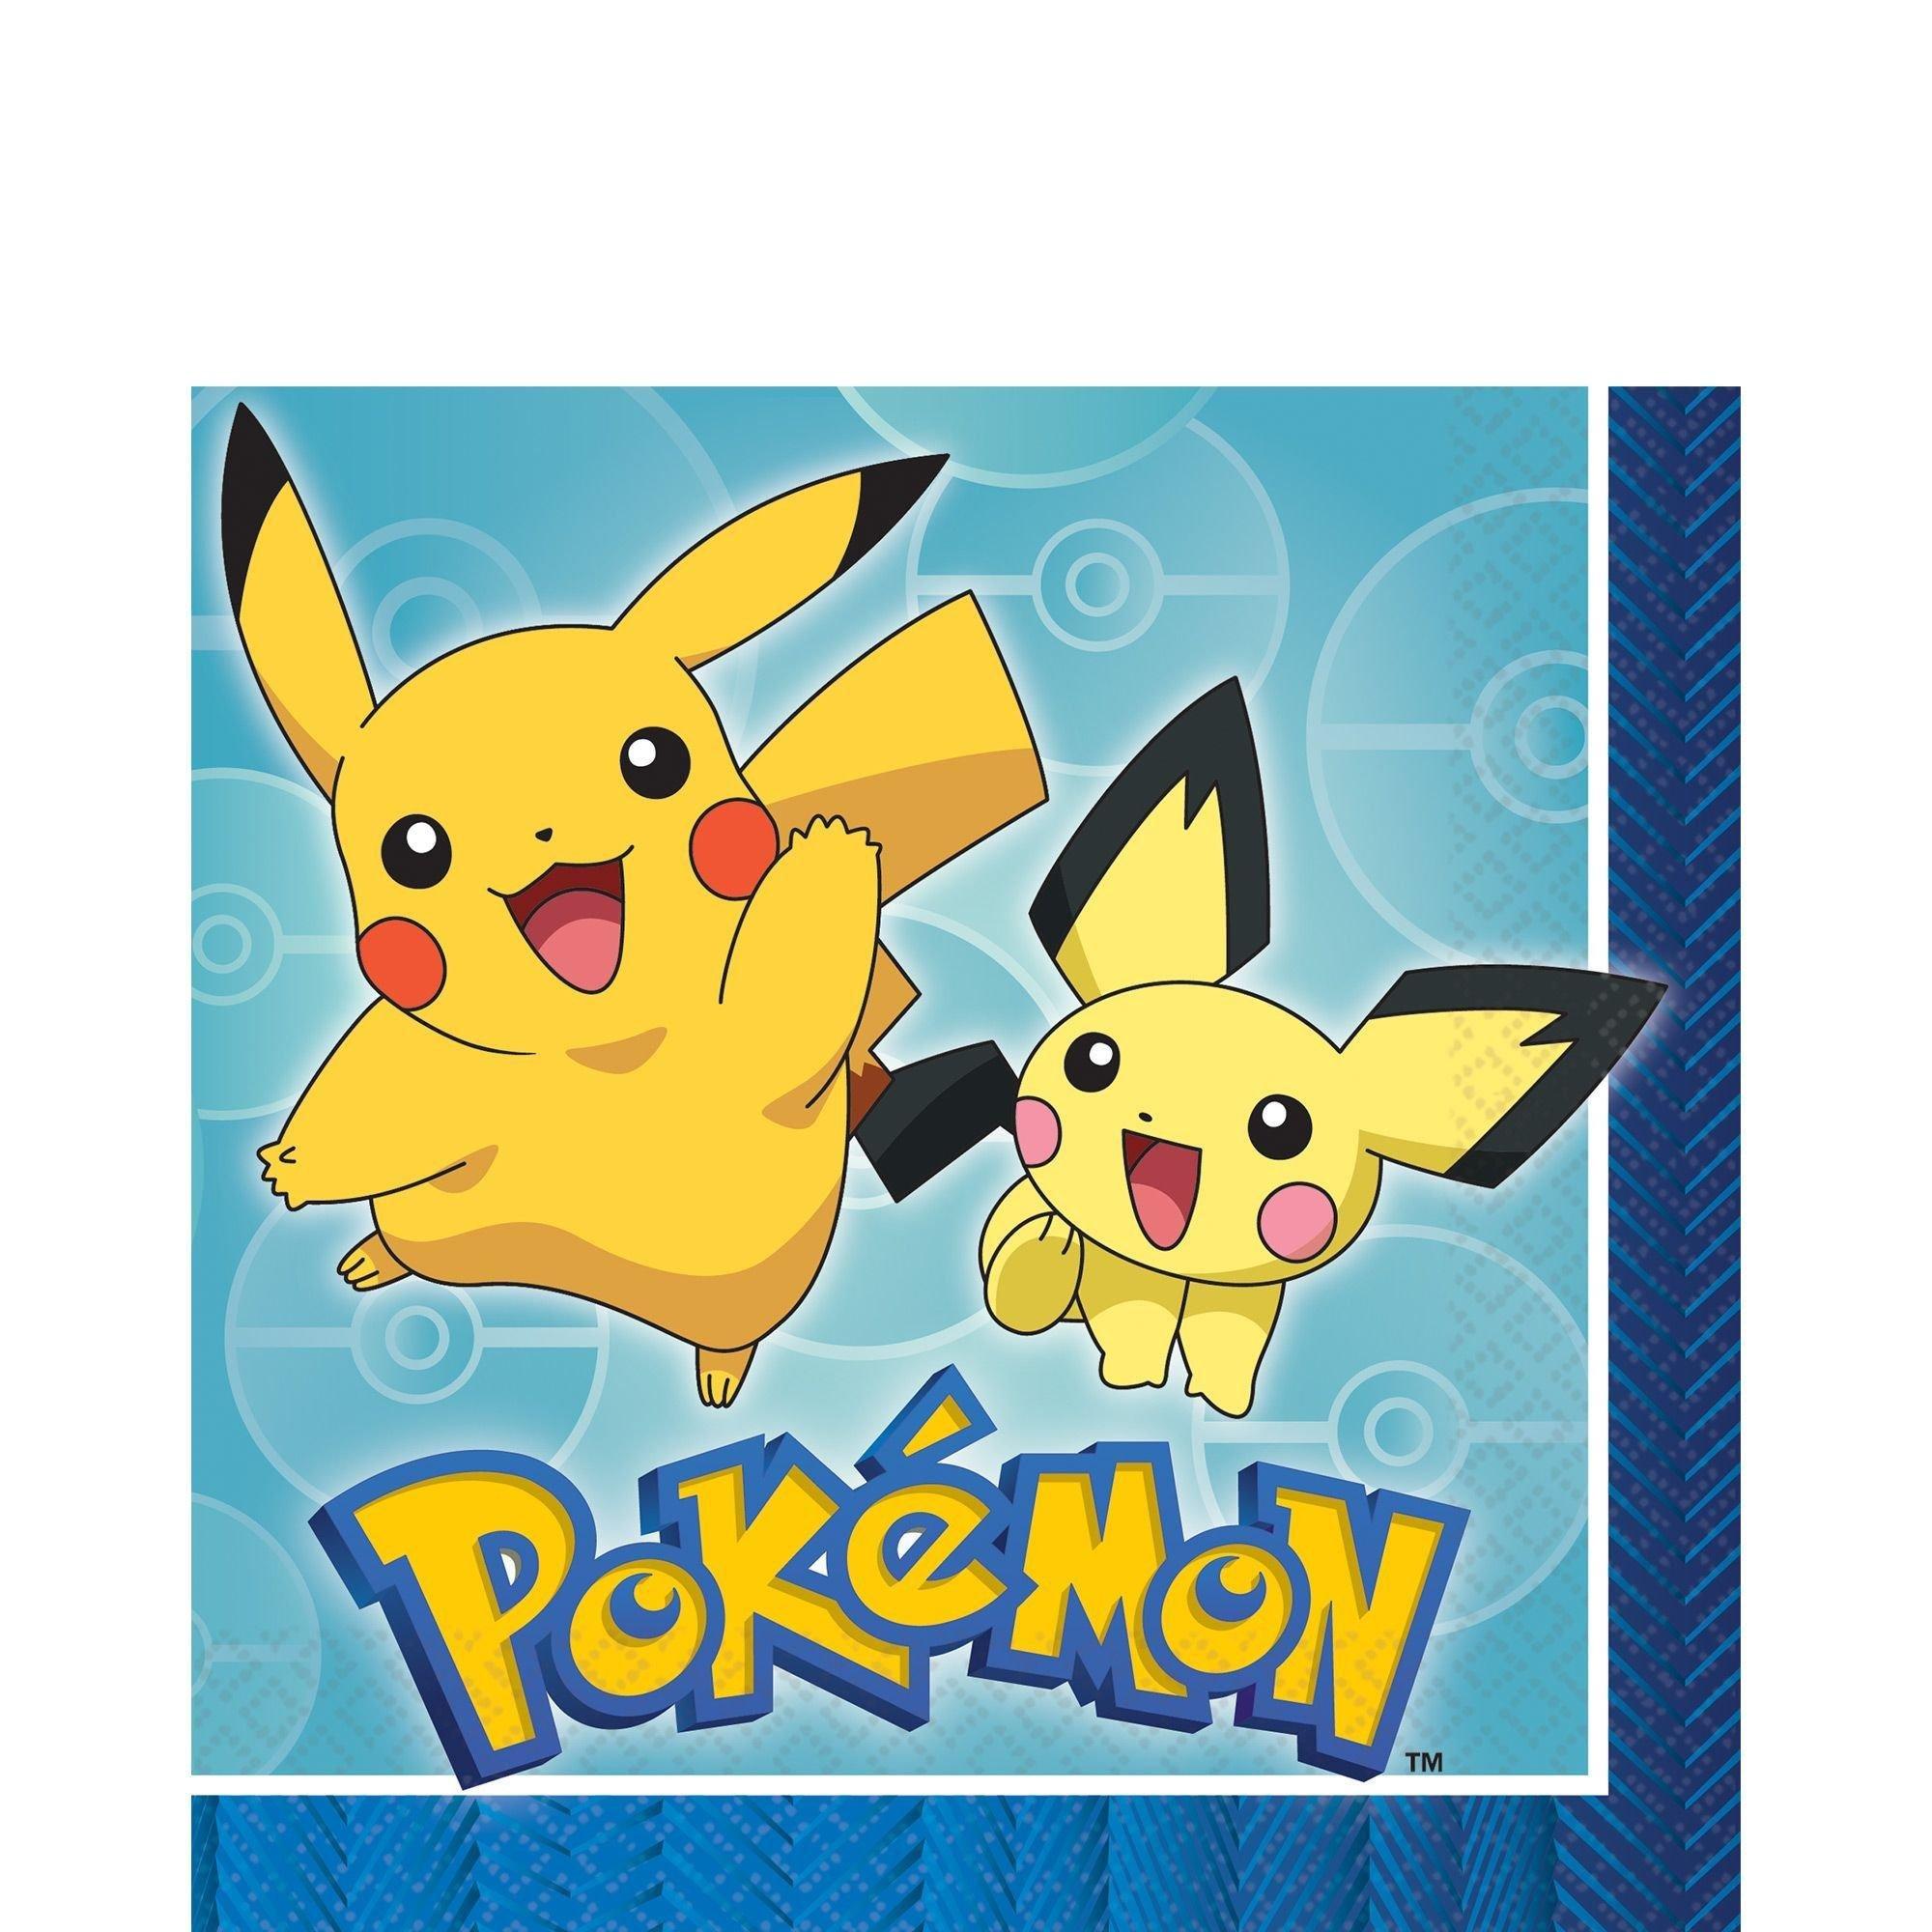 Pokémon Core Party Supplies Pack for 8 Guests - Kit Includes Plates, Napkins & Table Cover